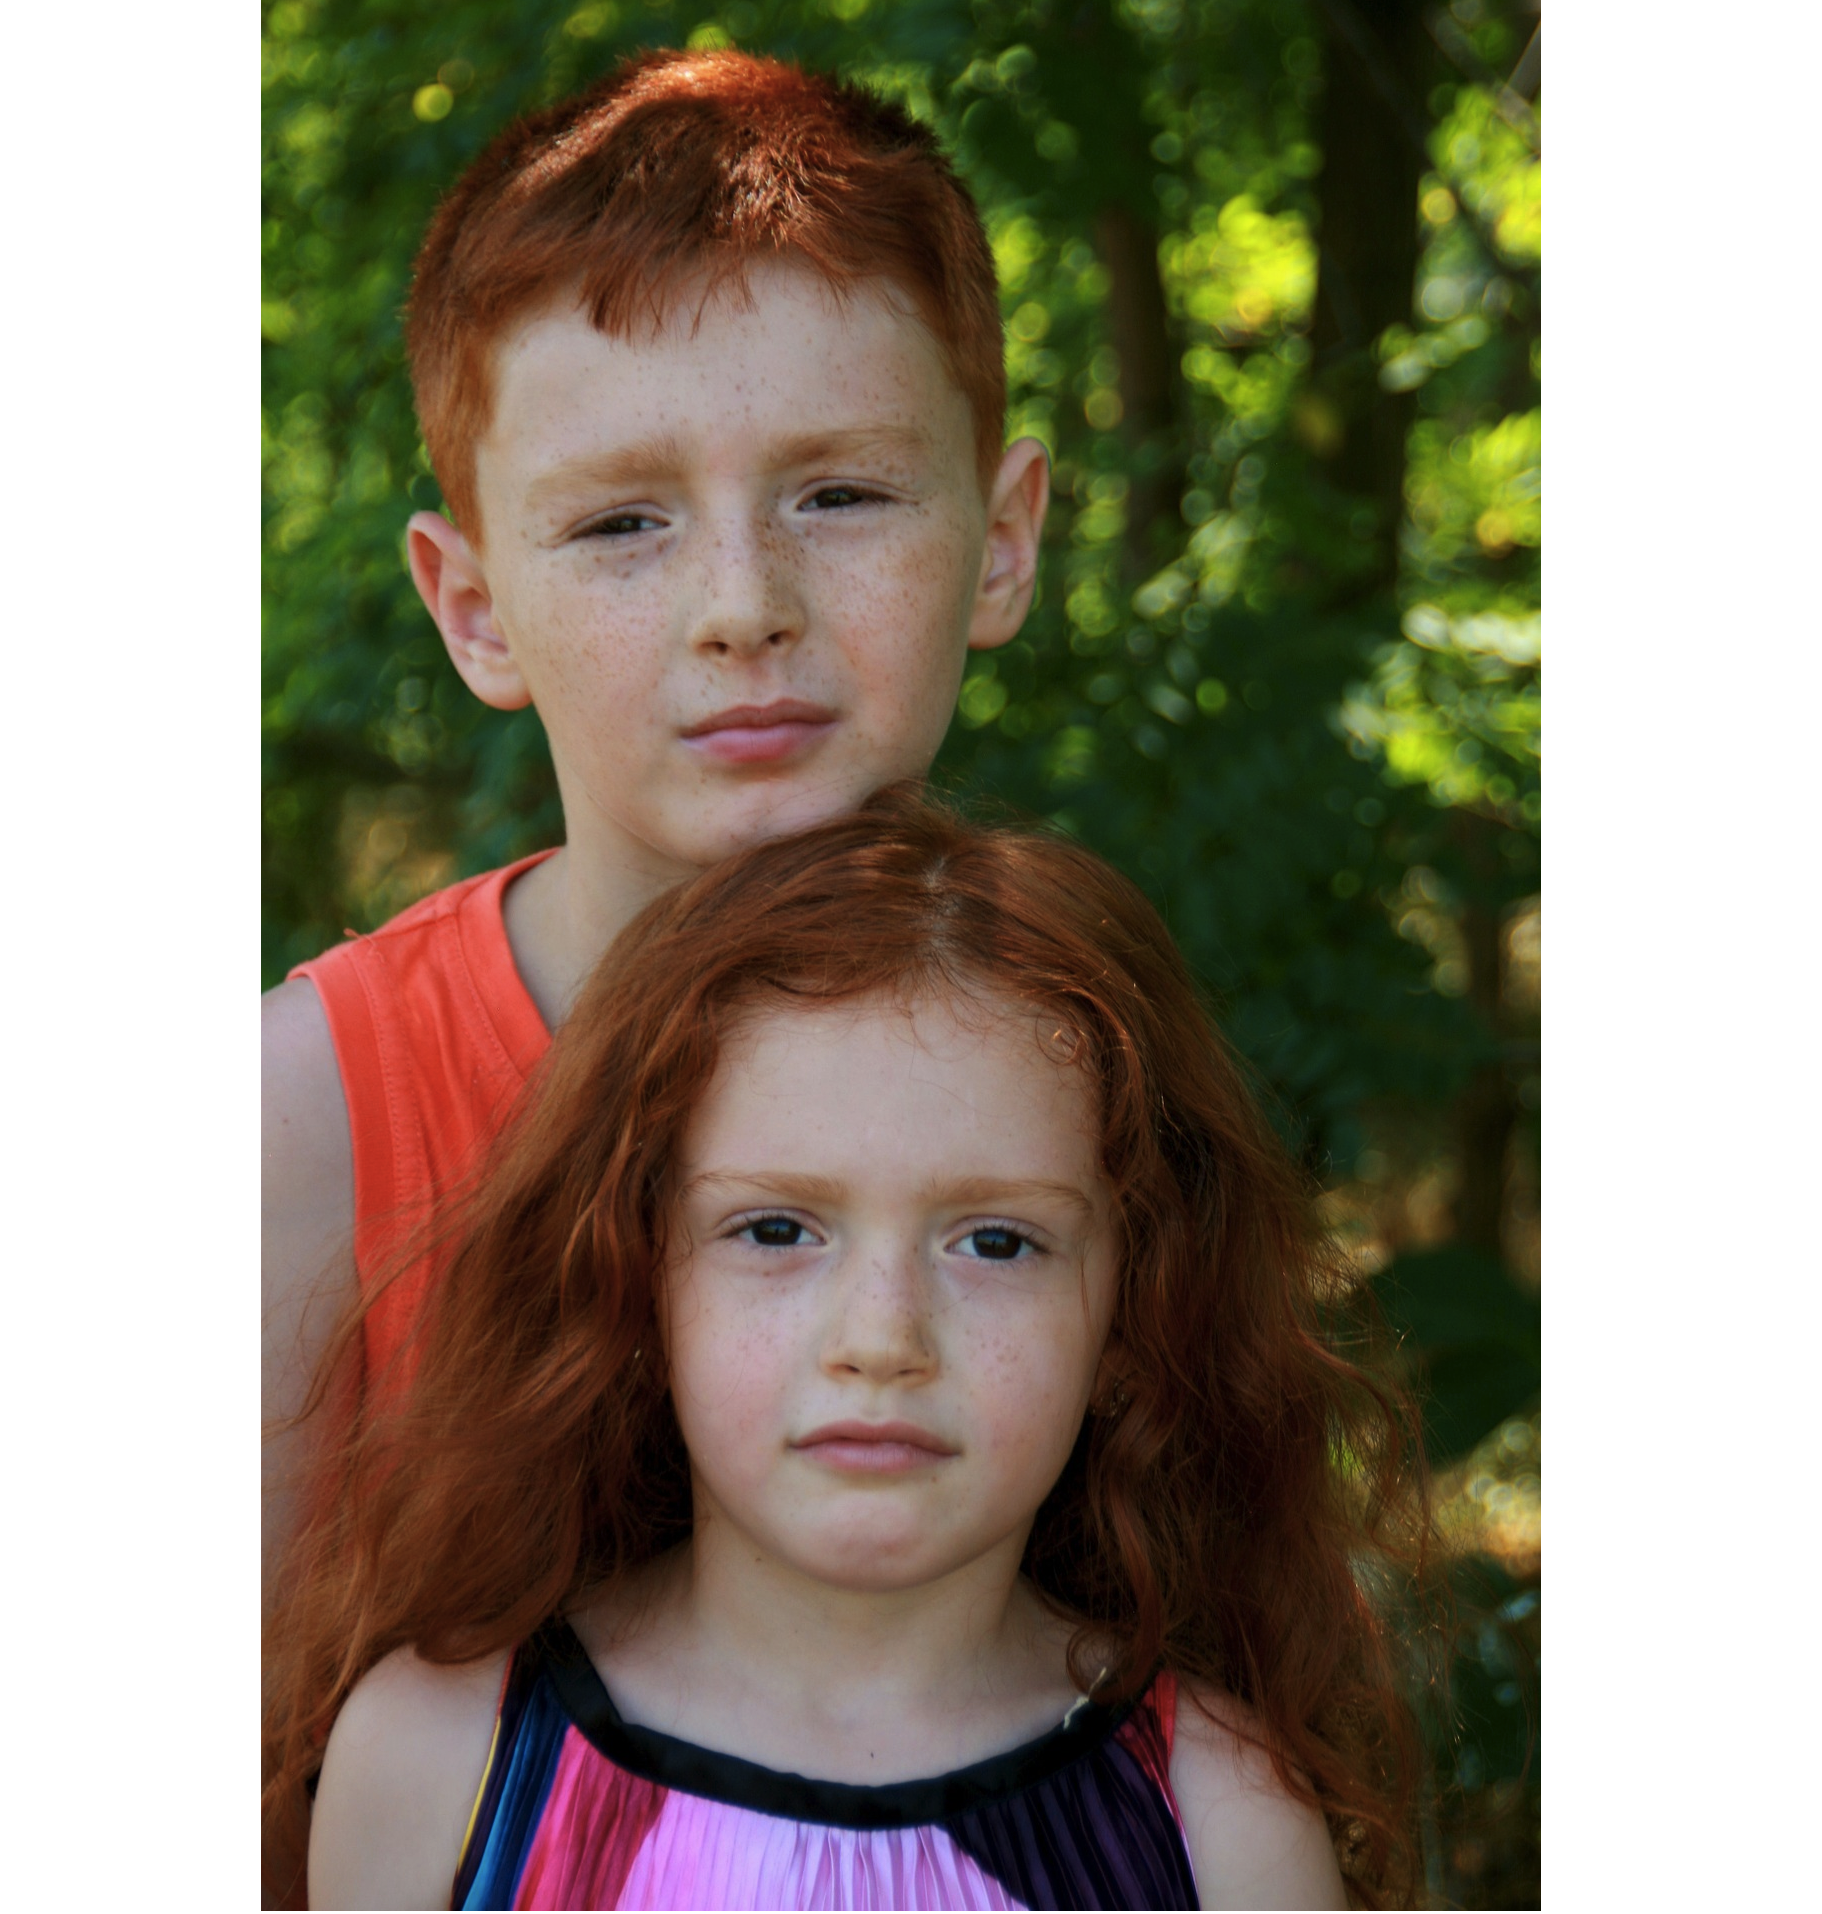 Image of a brother and sister who both have distinctive reddish hair.